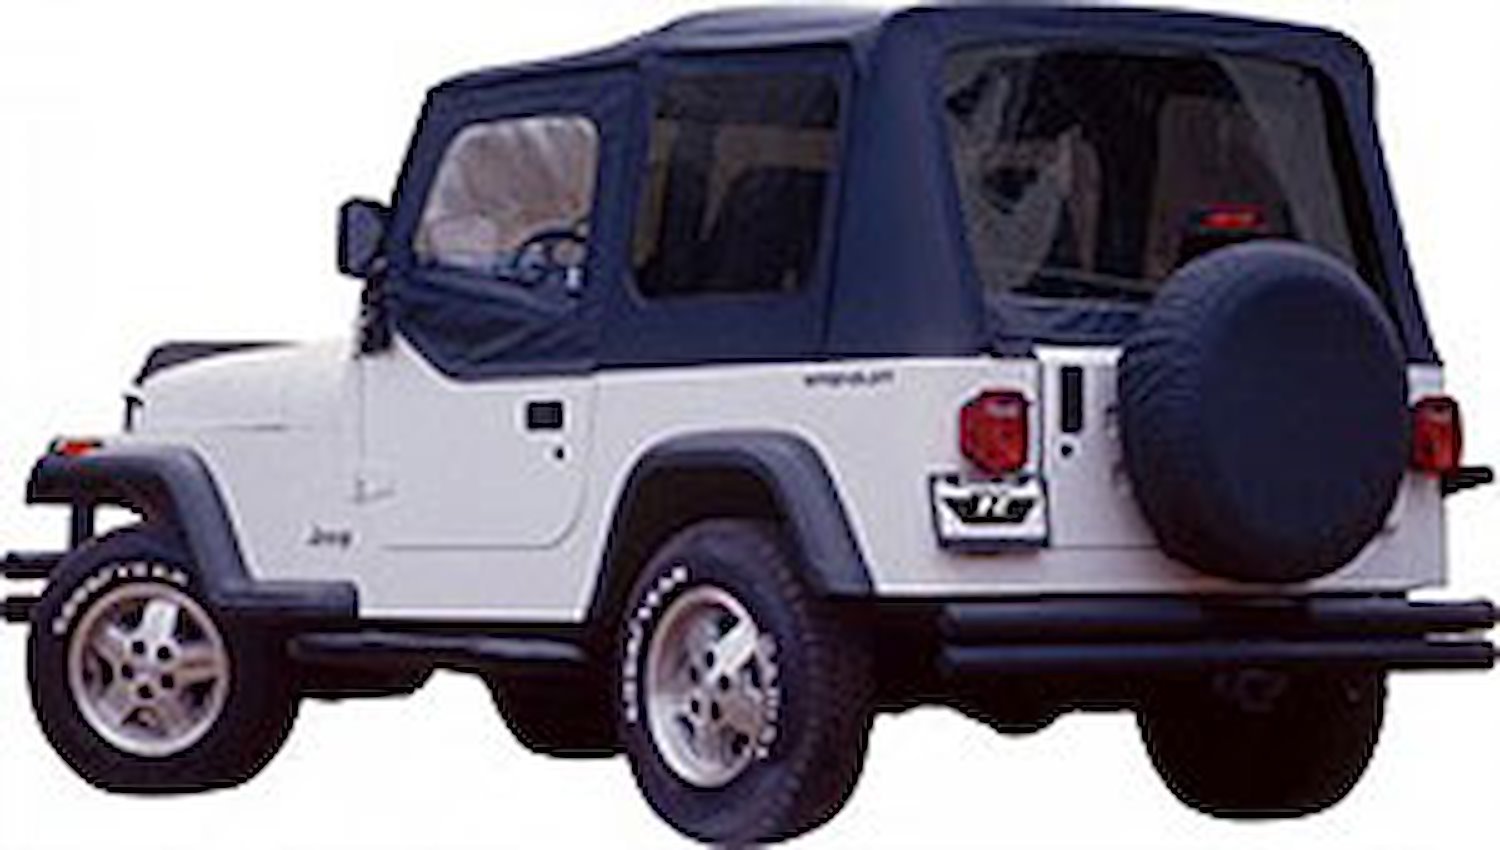 COMPLETE TOP FRAME AND HARDWARE W/TINTED WINDOWS 87-95 JEEP WRANGLER WITH SOFT UPPER DOORS BLACK DENIM